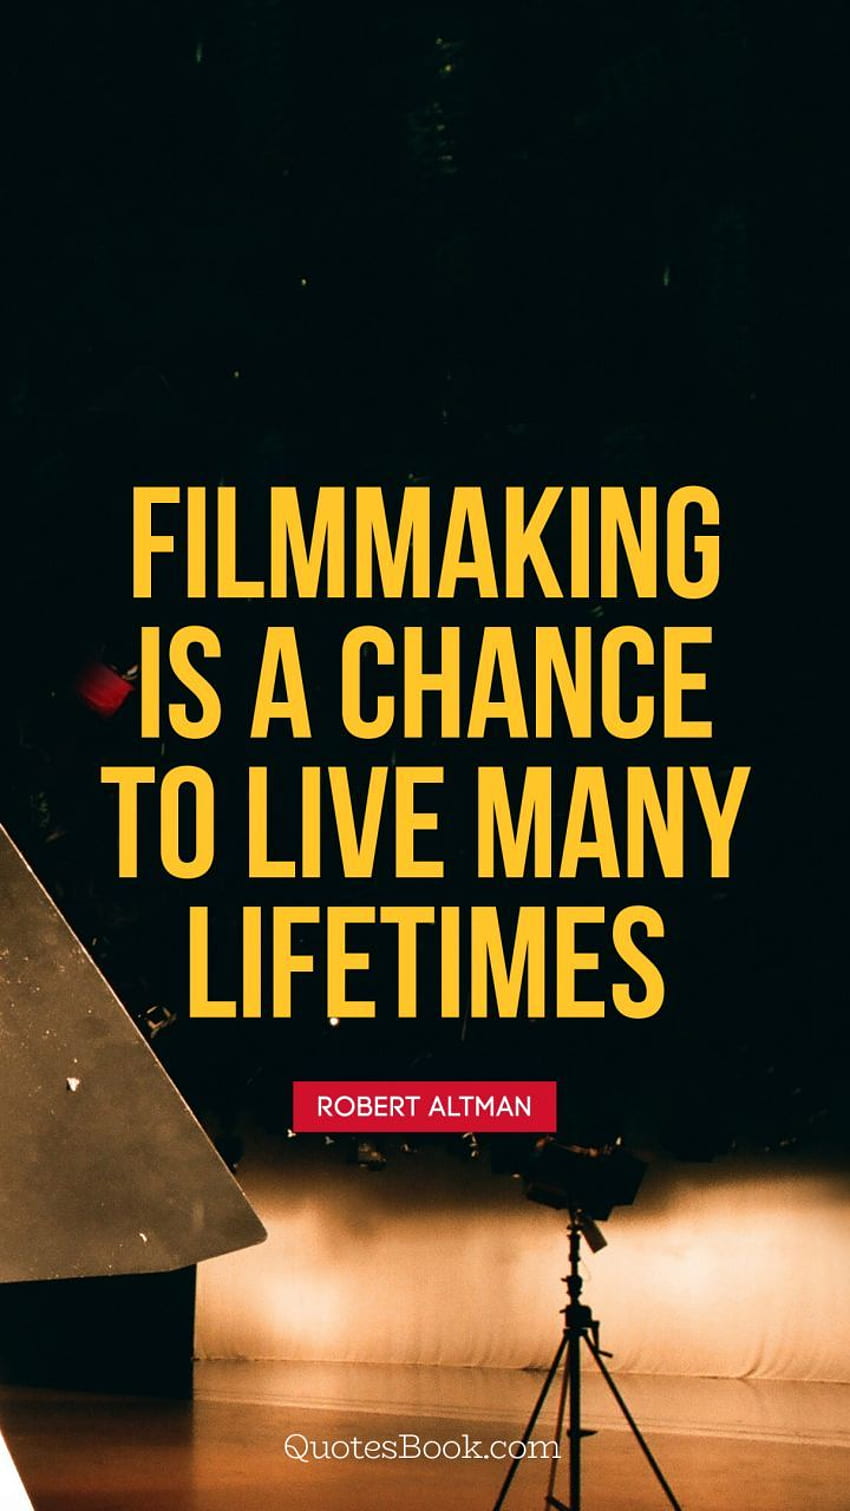 Quote By Robert Altman Filmmaking Is A Chance To Live HD phone wallpaper